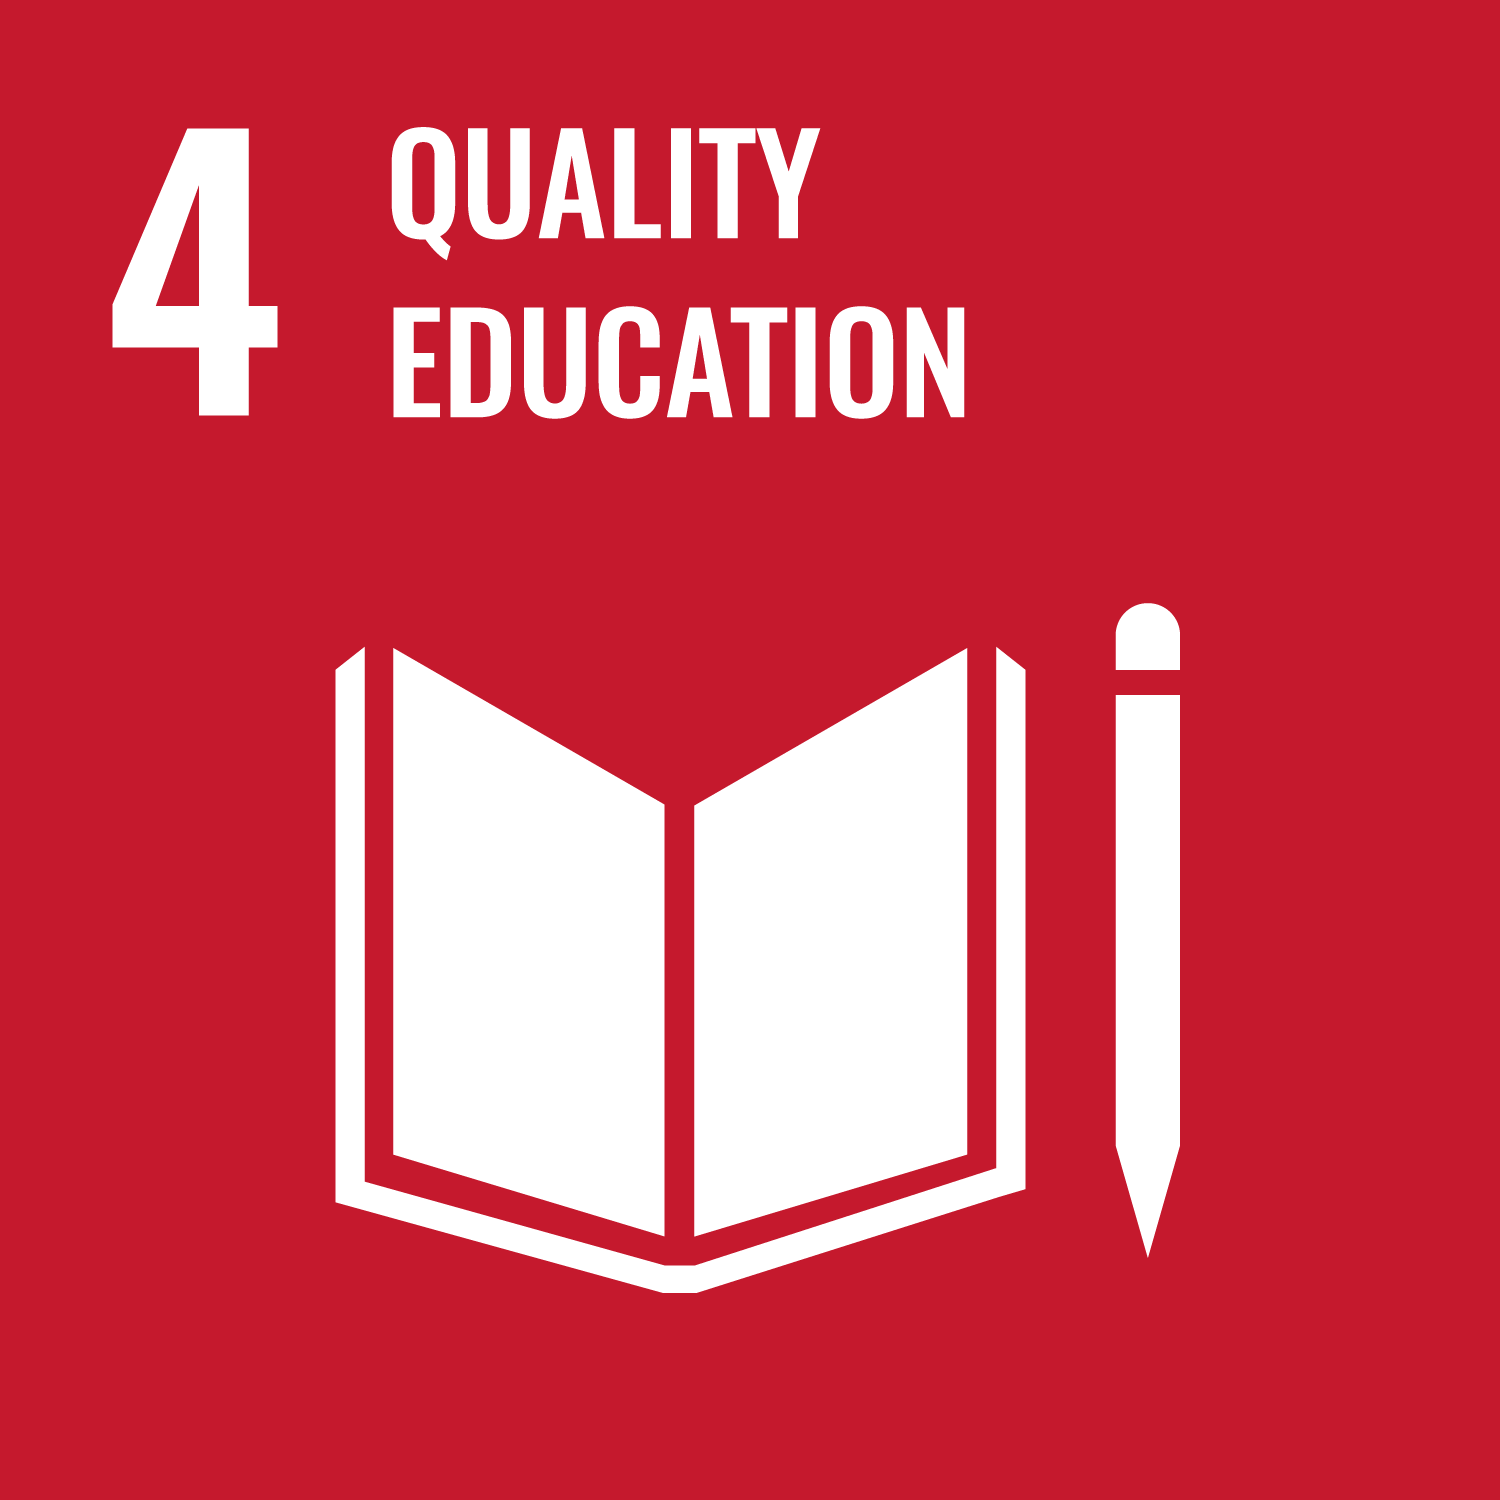 Target 4．Quality education